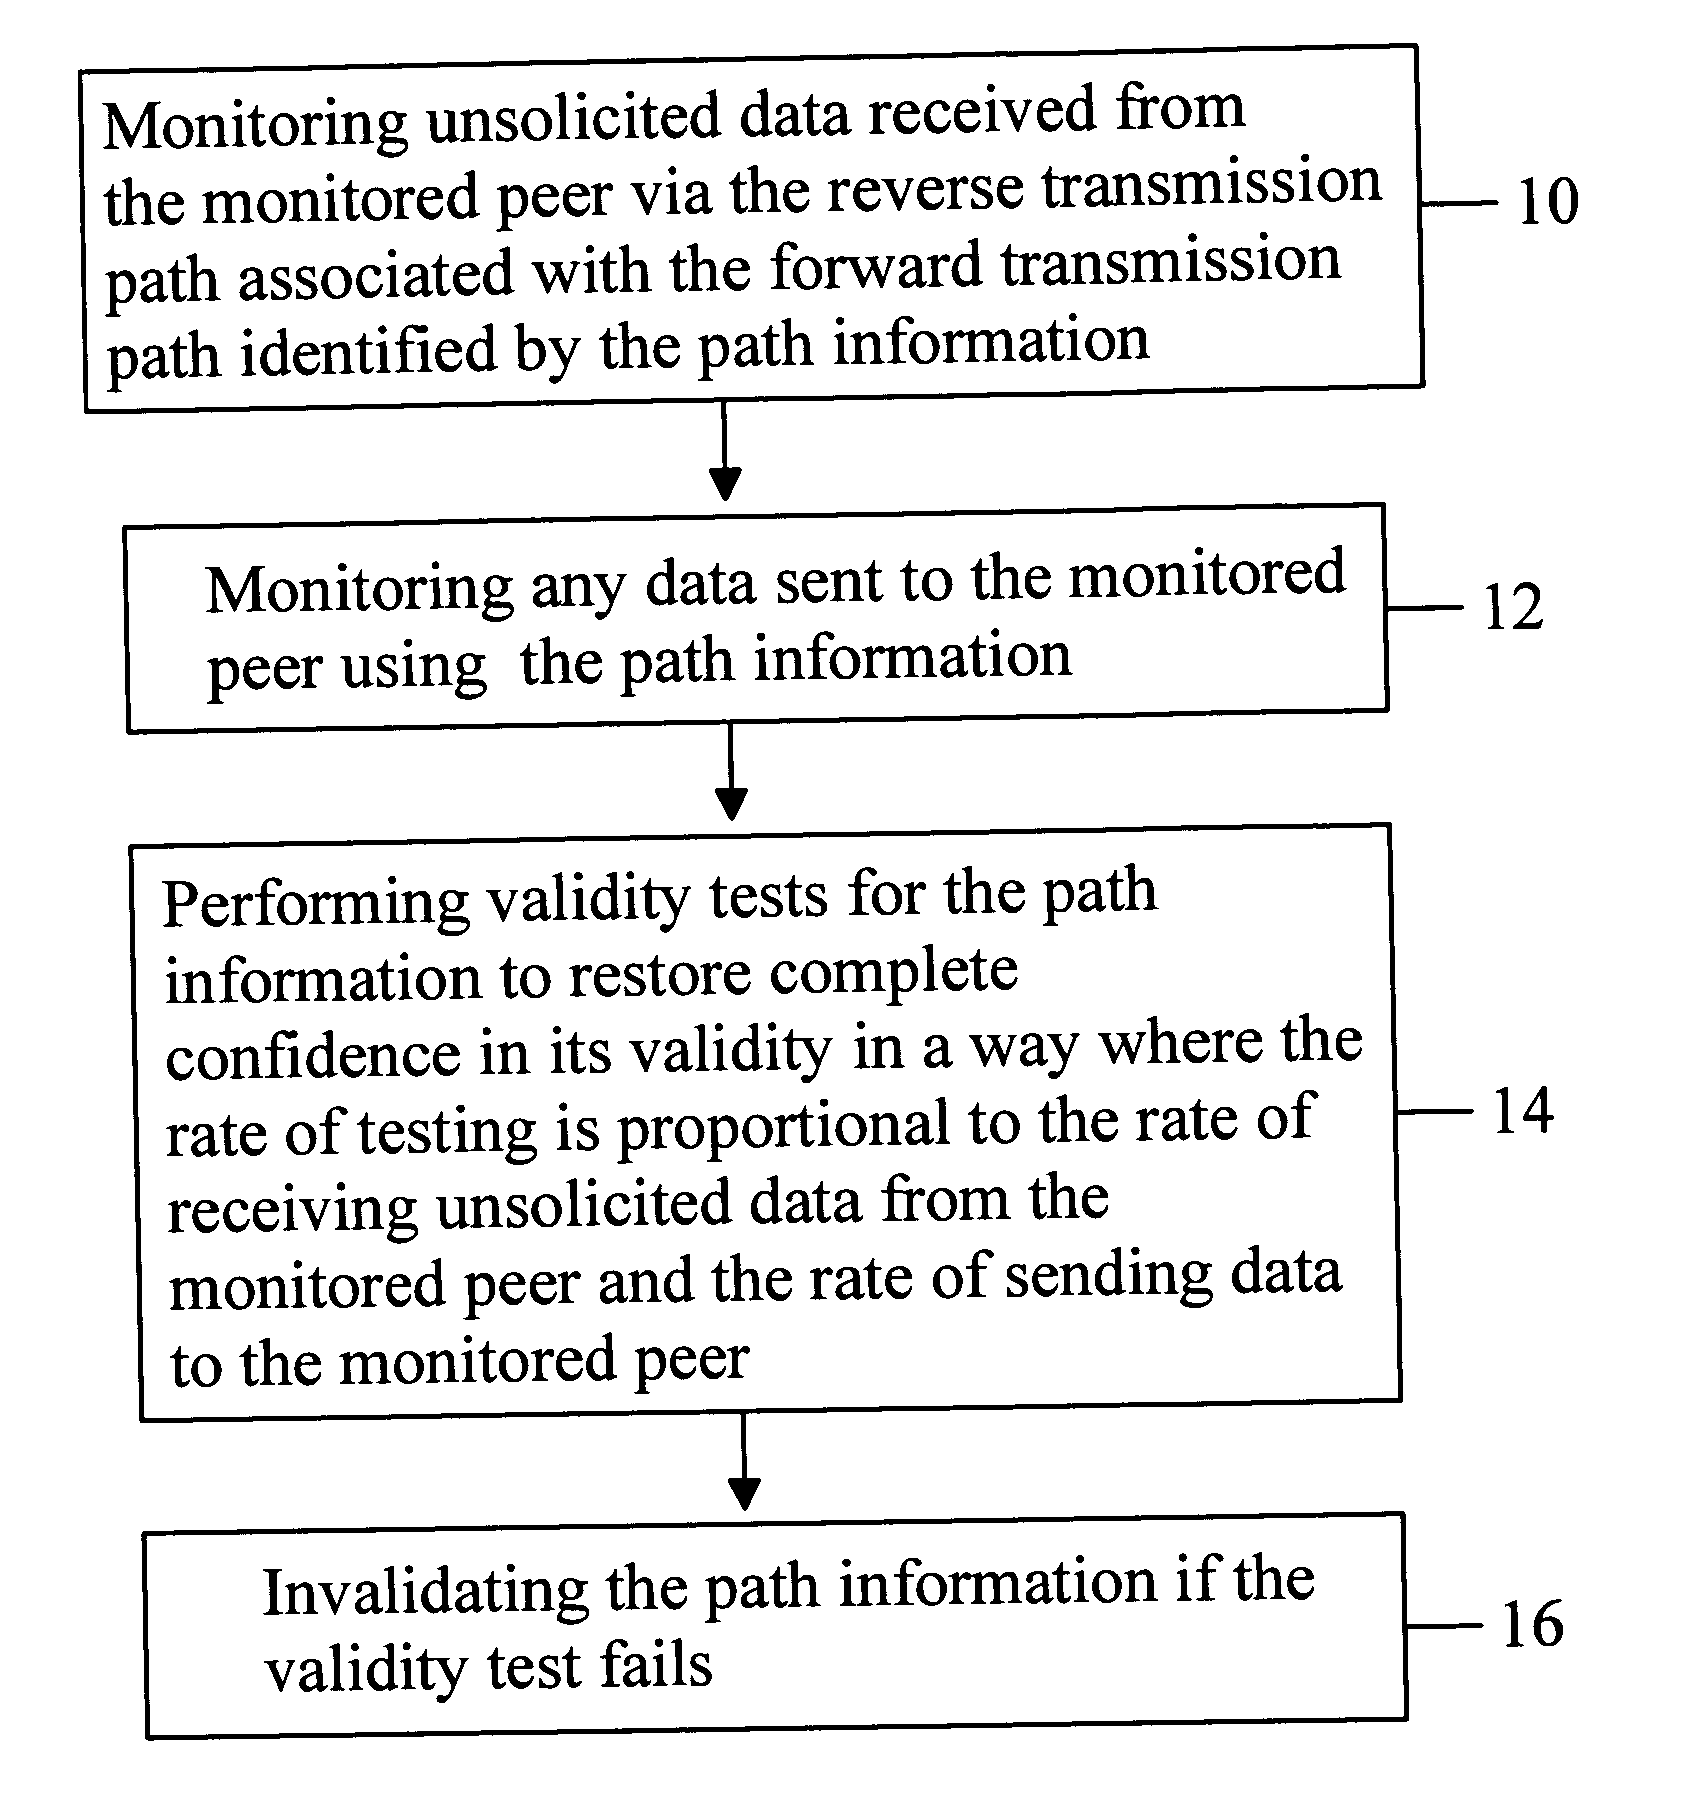 Failure detection of path information corresponding to a transmission path